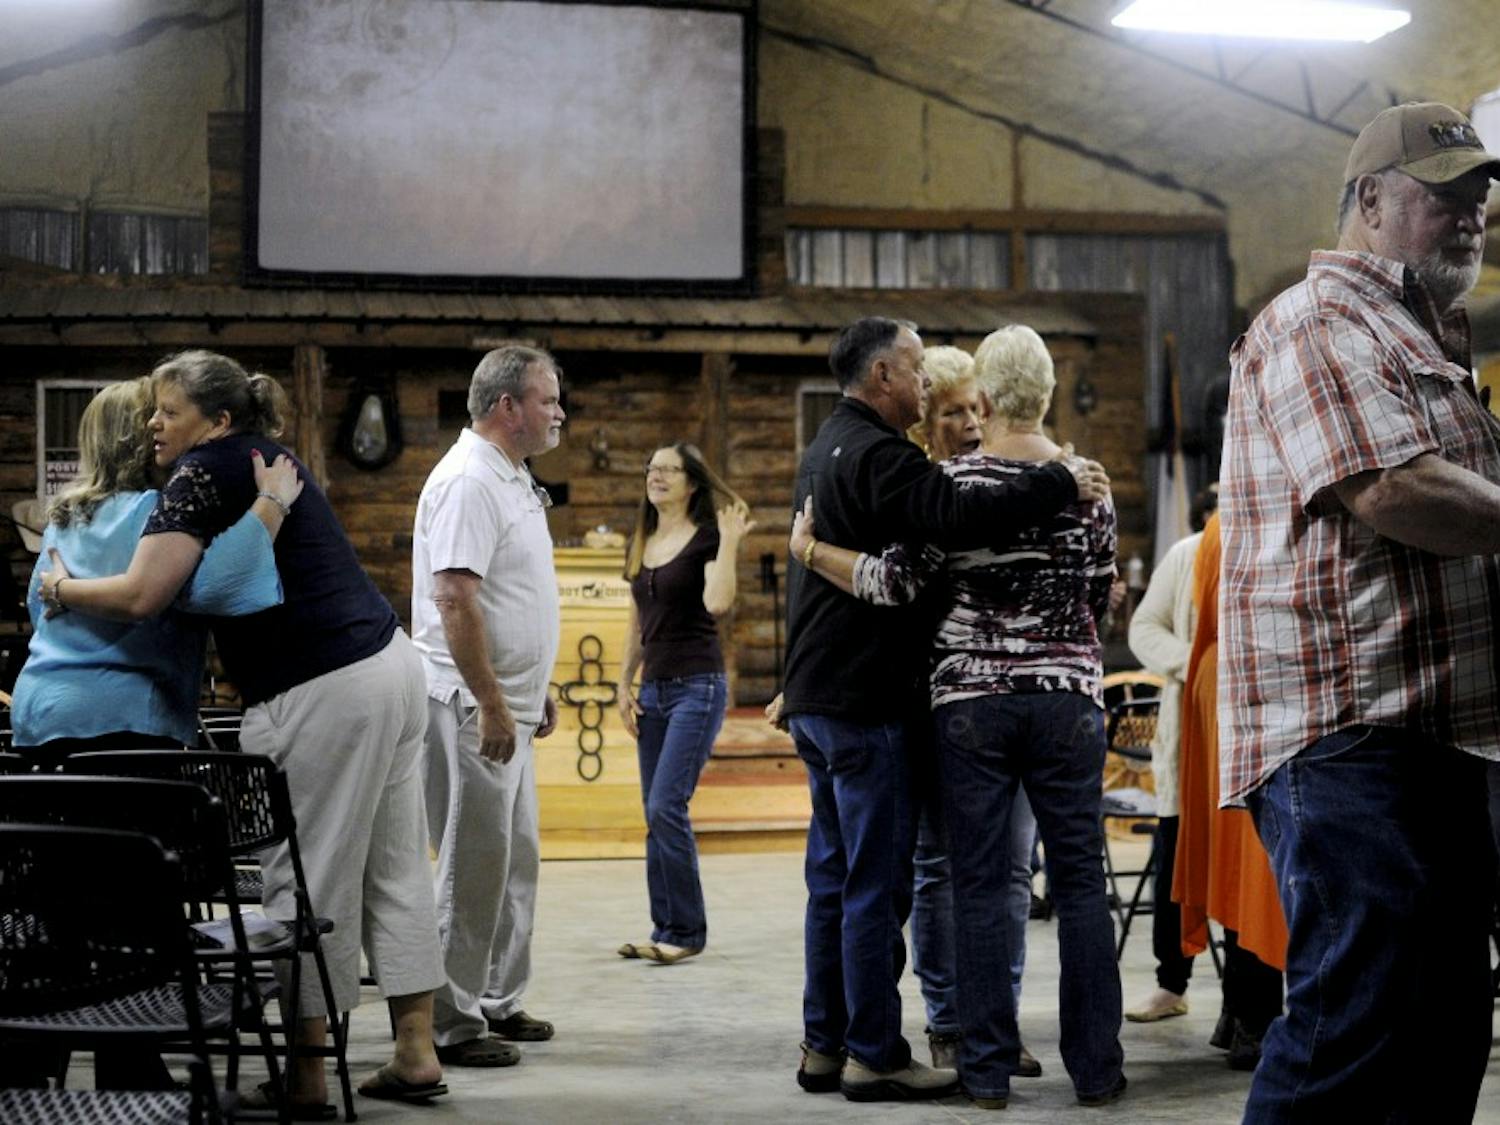 Members of the Cowboy Church greet each other on April 22, 2018, in Waverly, Ala.